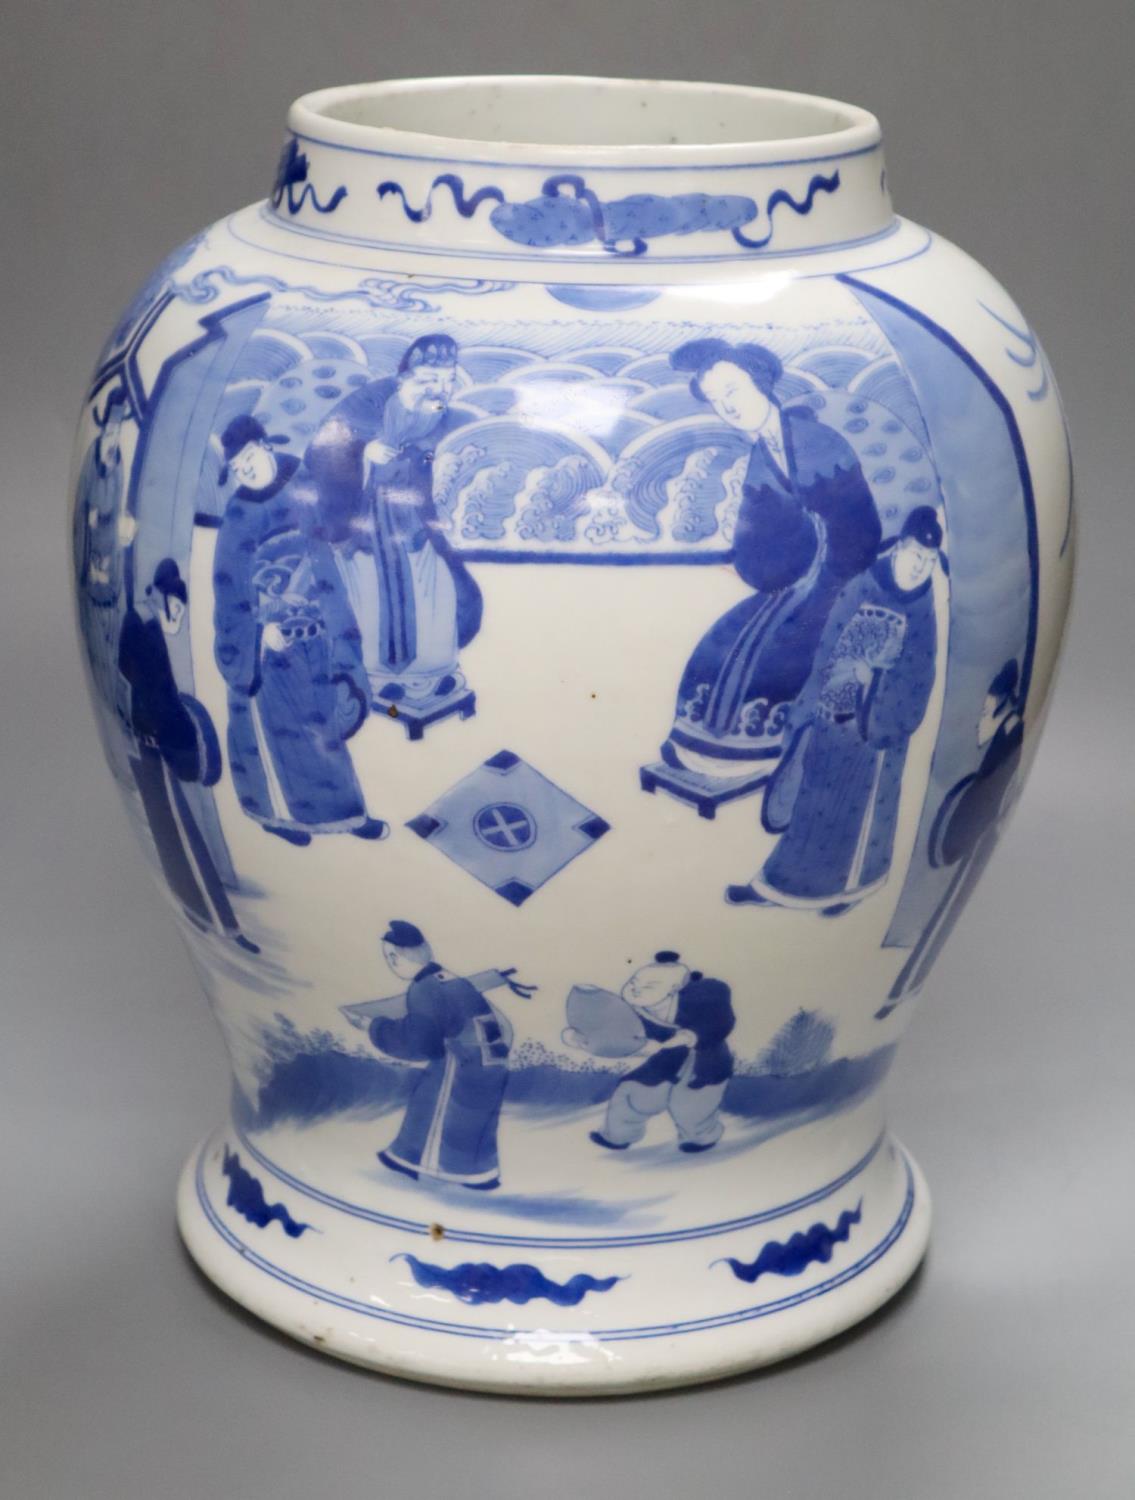 A Chinese blue and white baluster vase, height 33cmCONDITION: One oval chip to glaze,